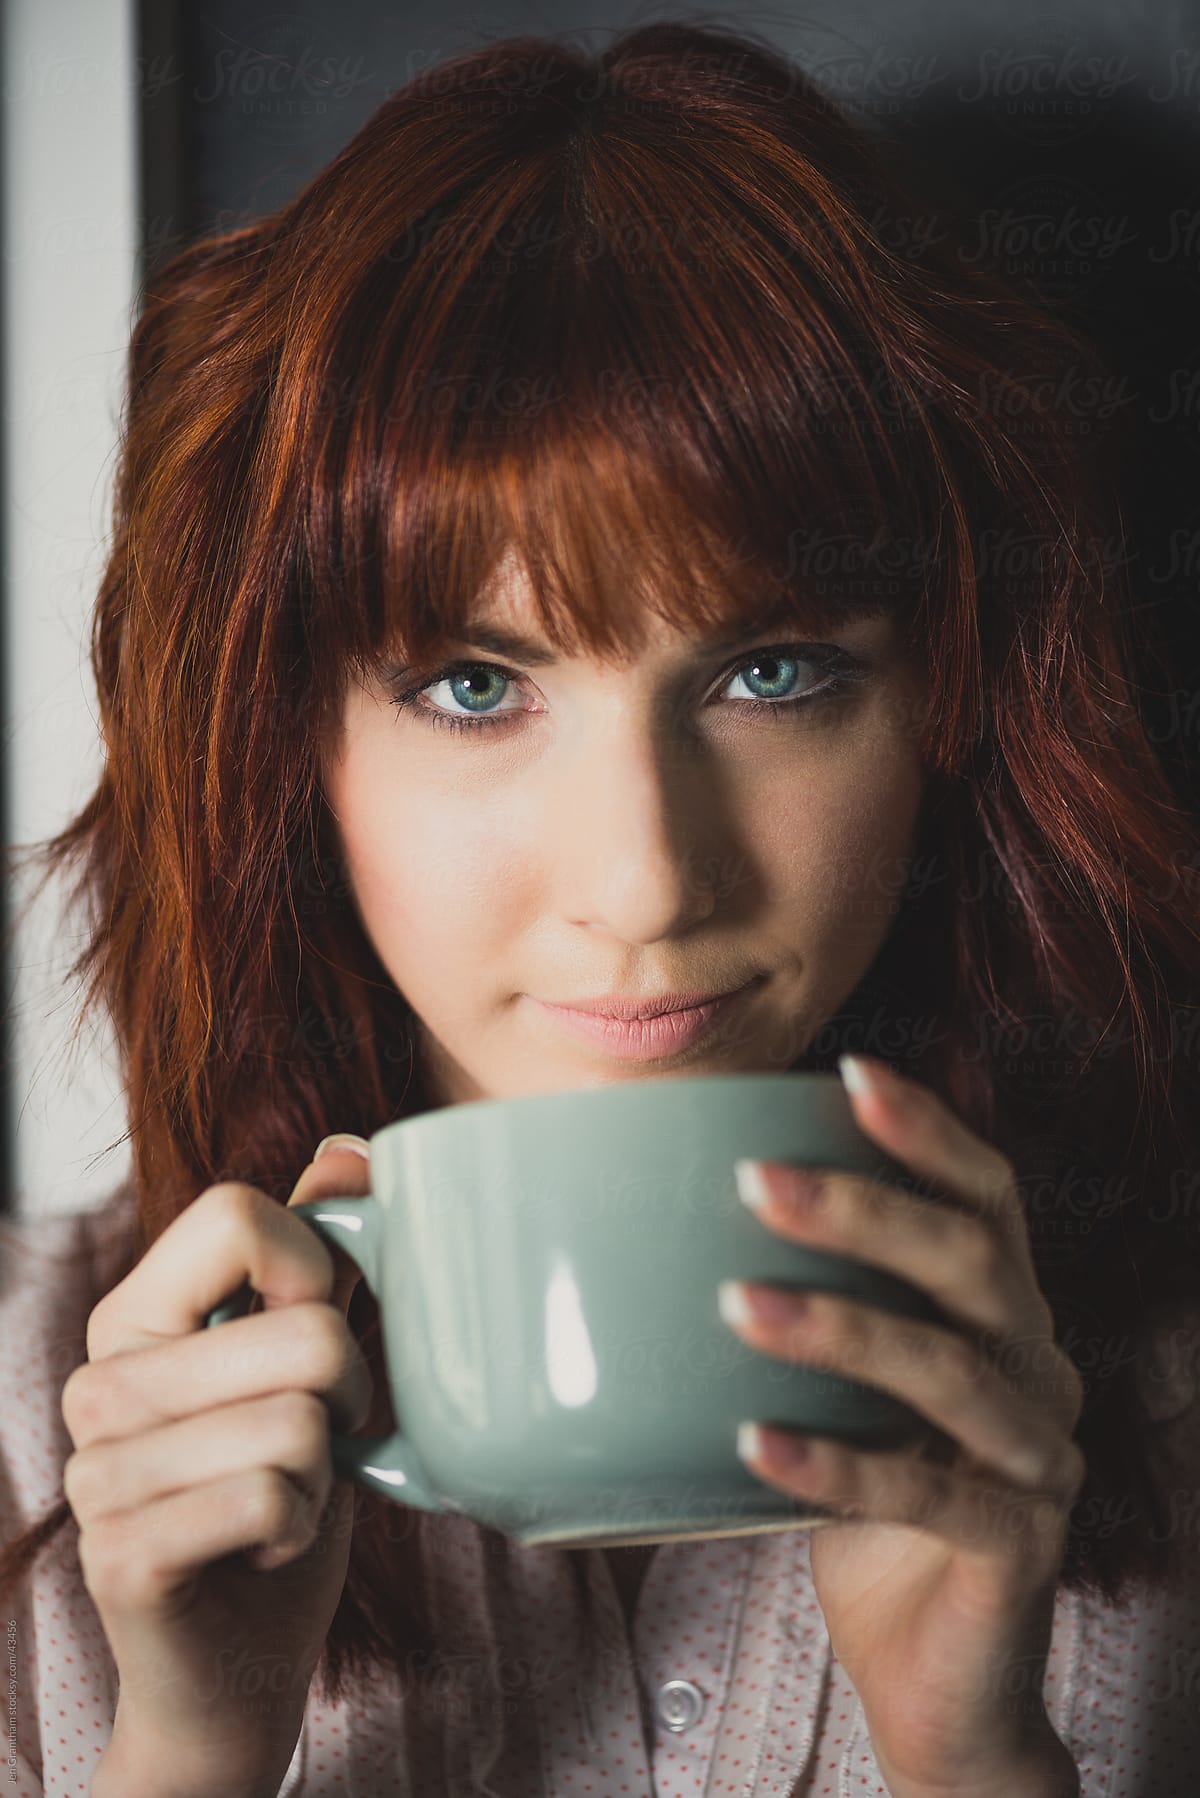 Young woman with coffee